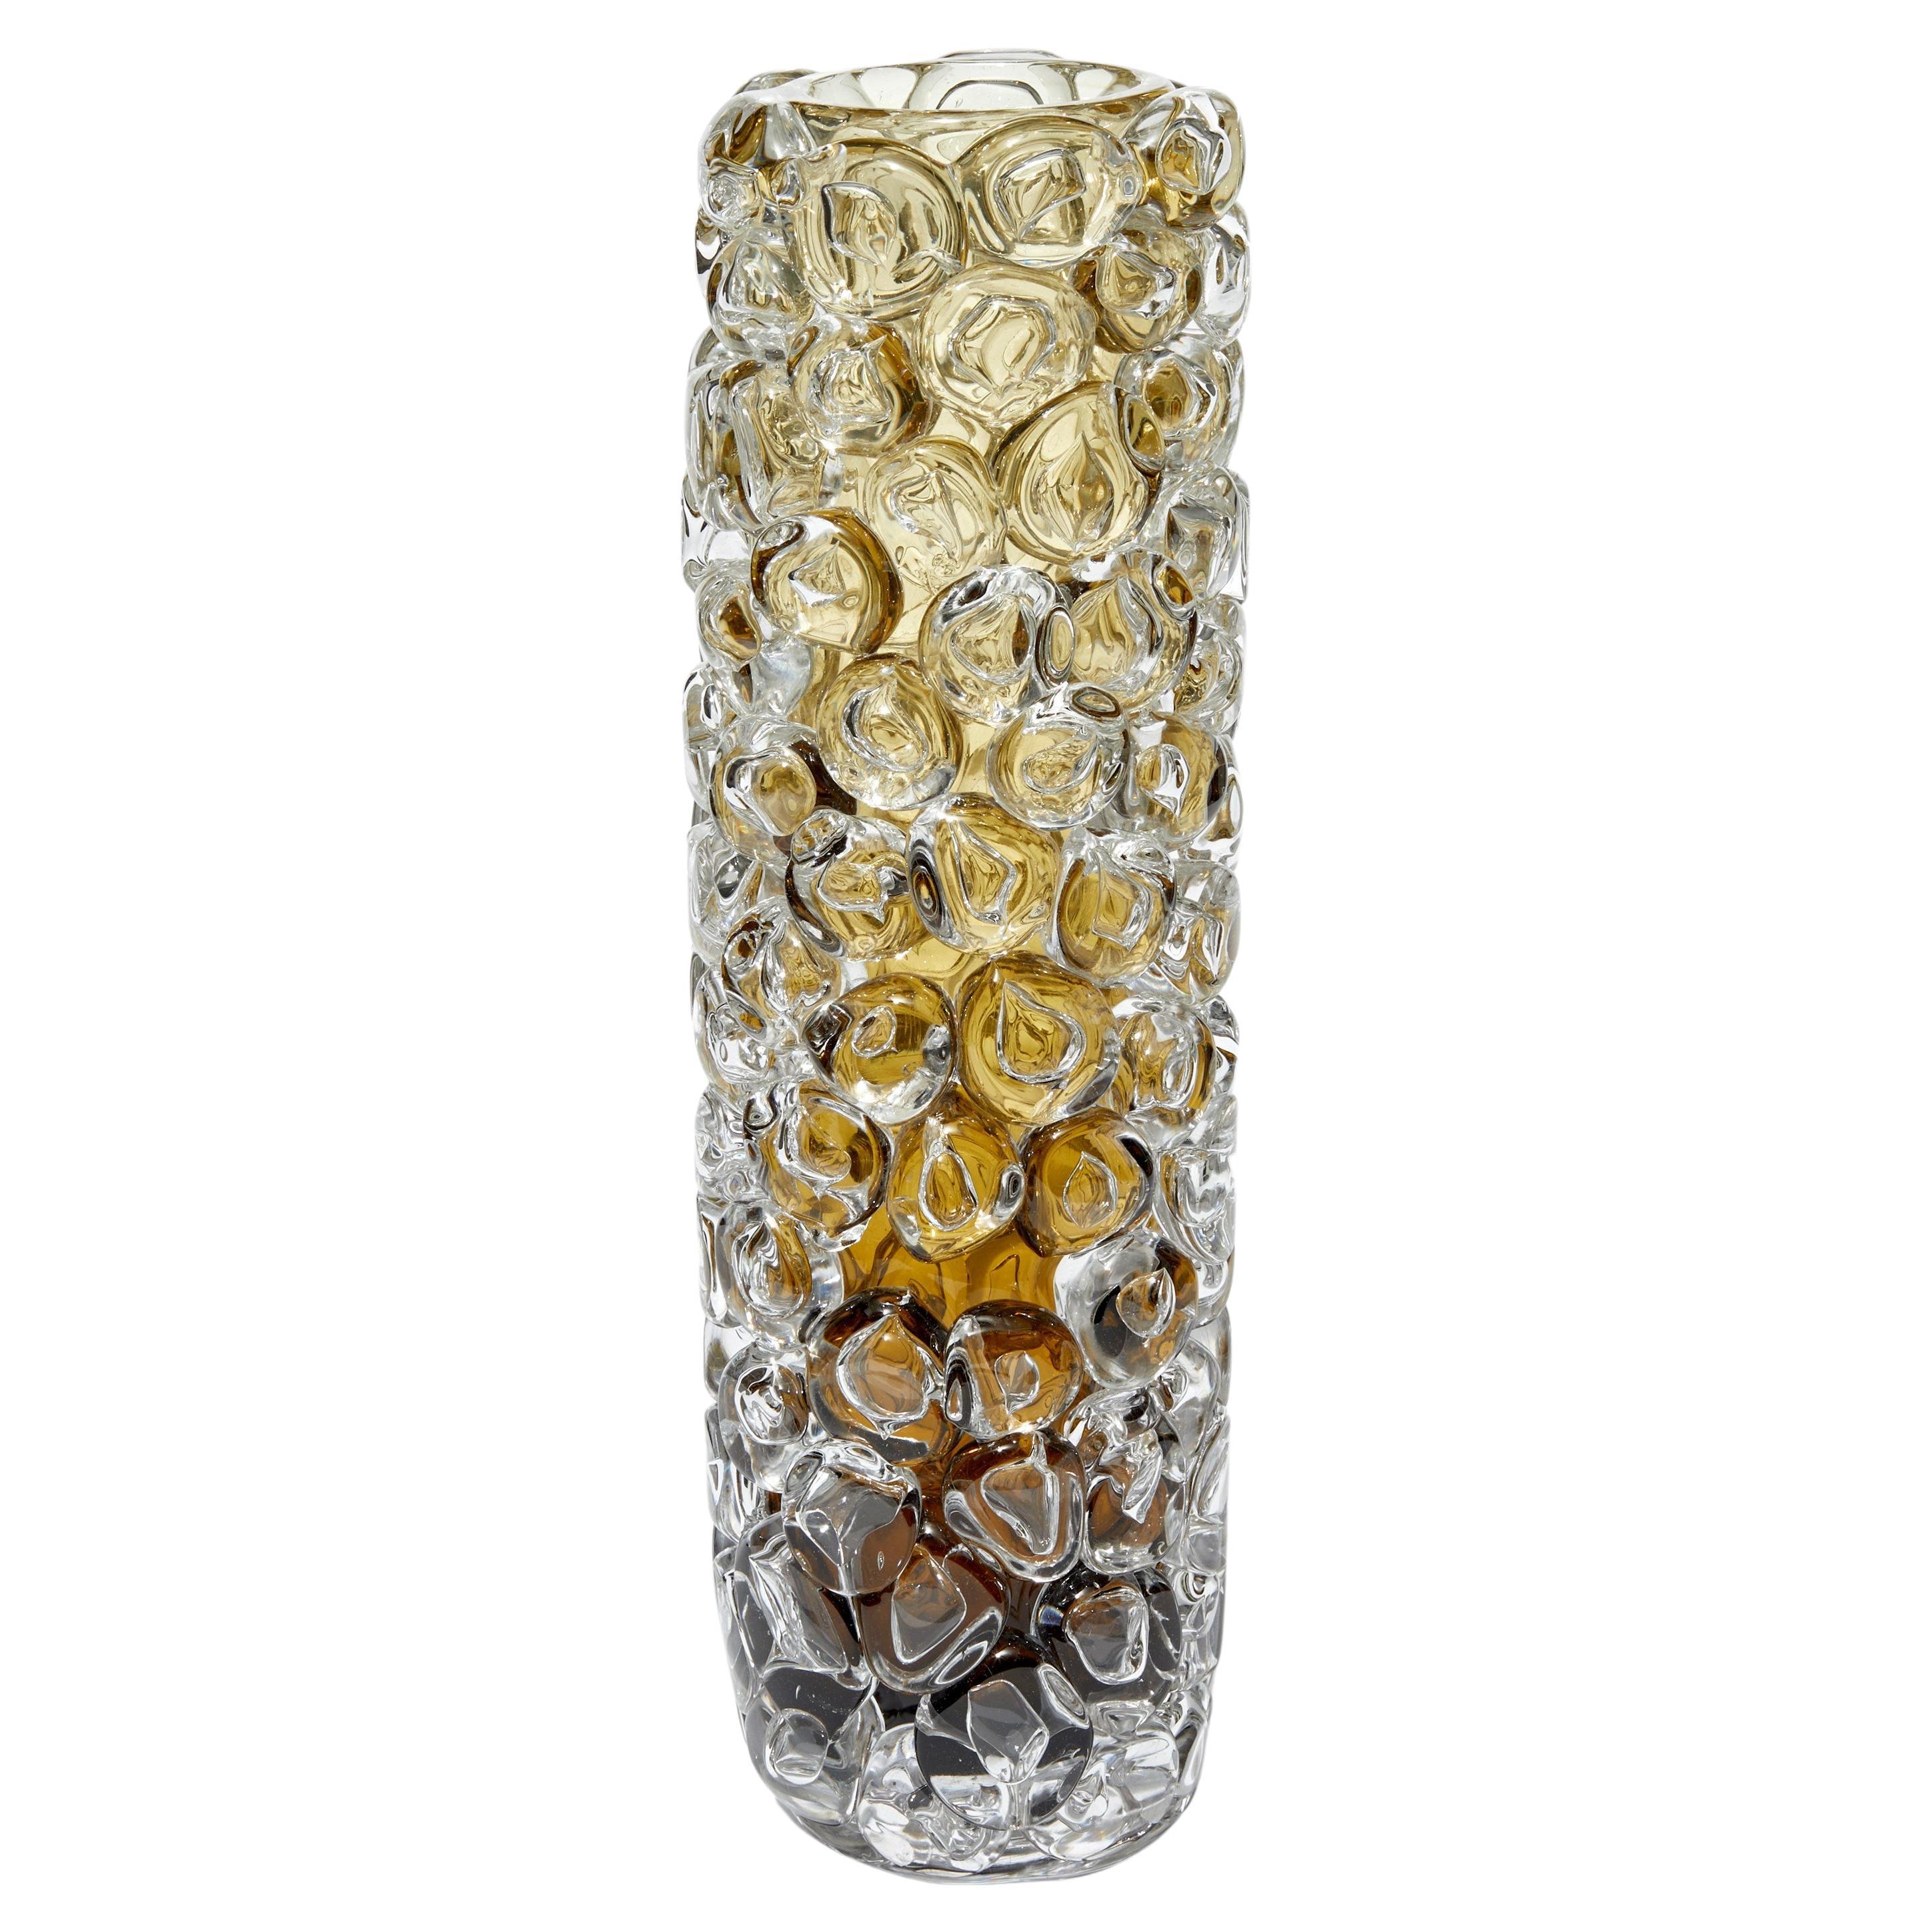 Bubblewrap in Olive Ombre, a handblown textured glass vase by Allister Malcolm